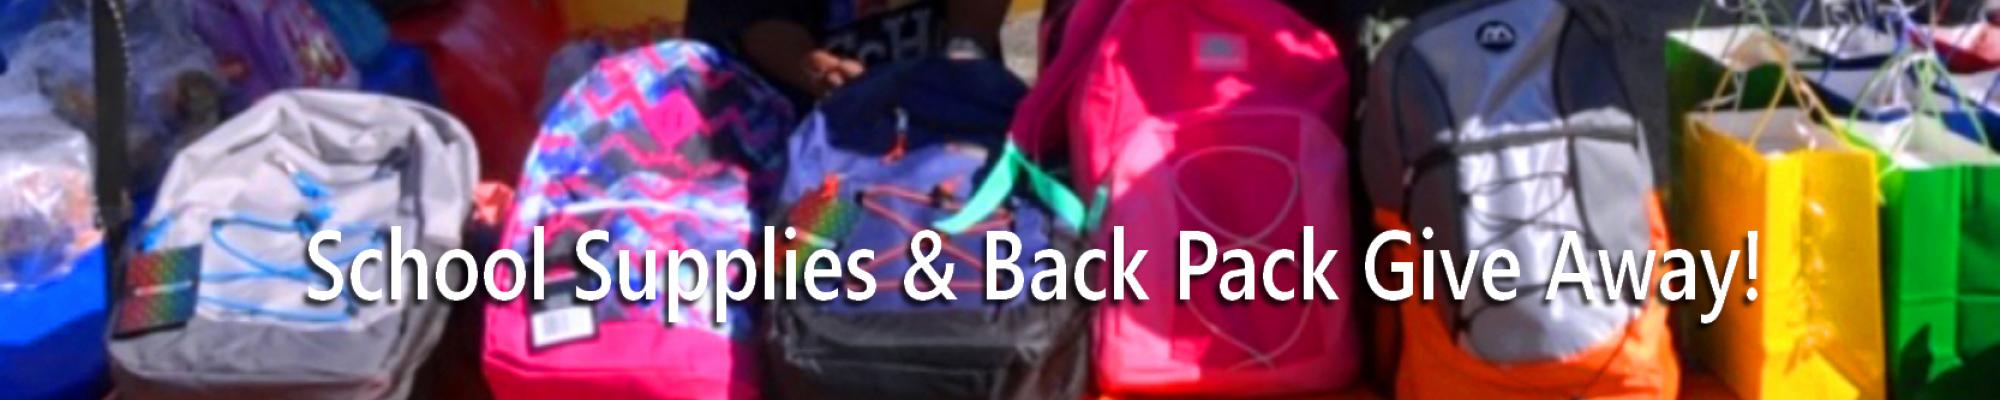 Back to School Backpack and School Supplies Give Away!